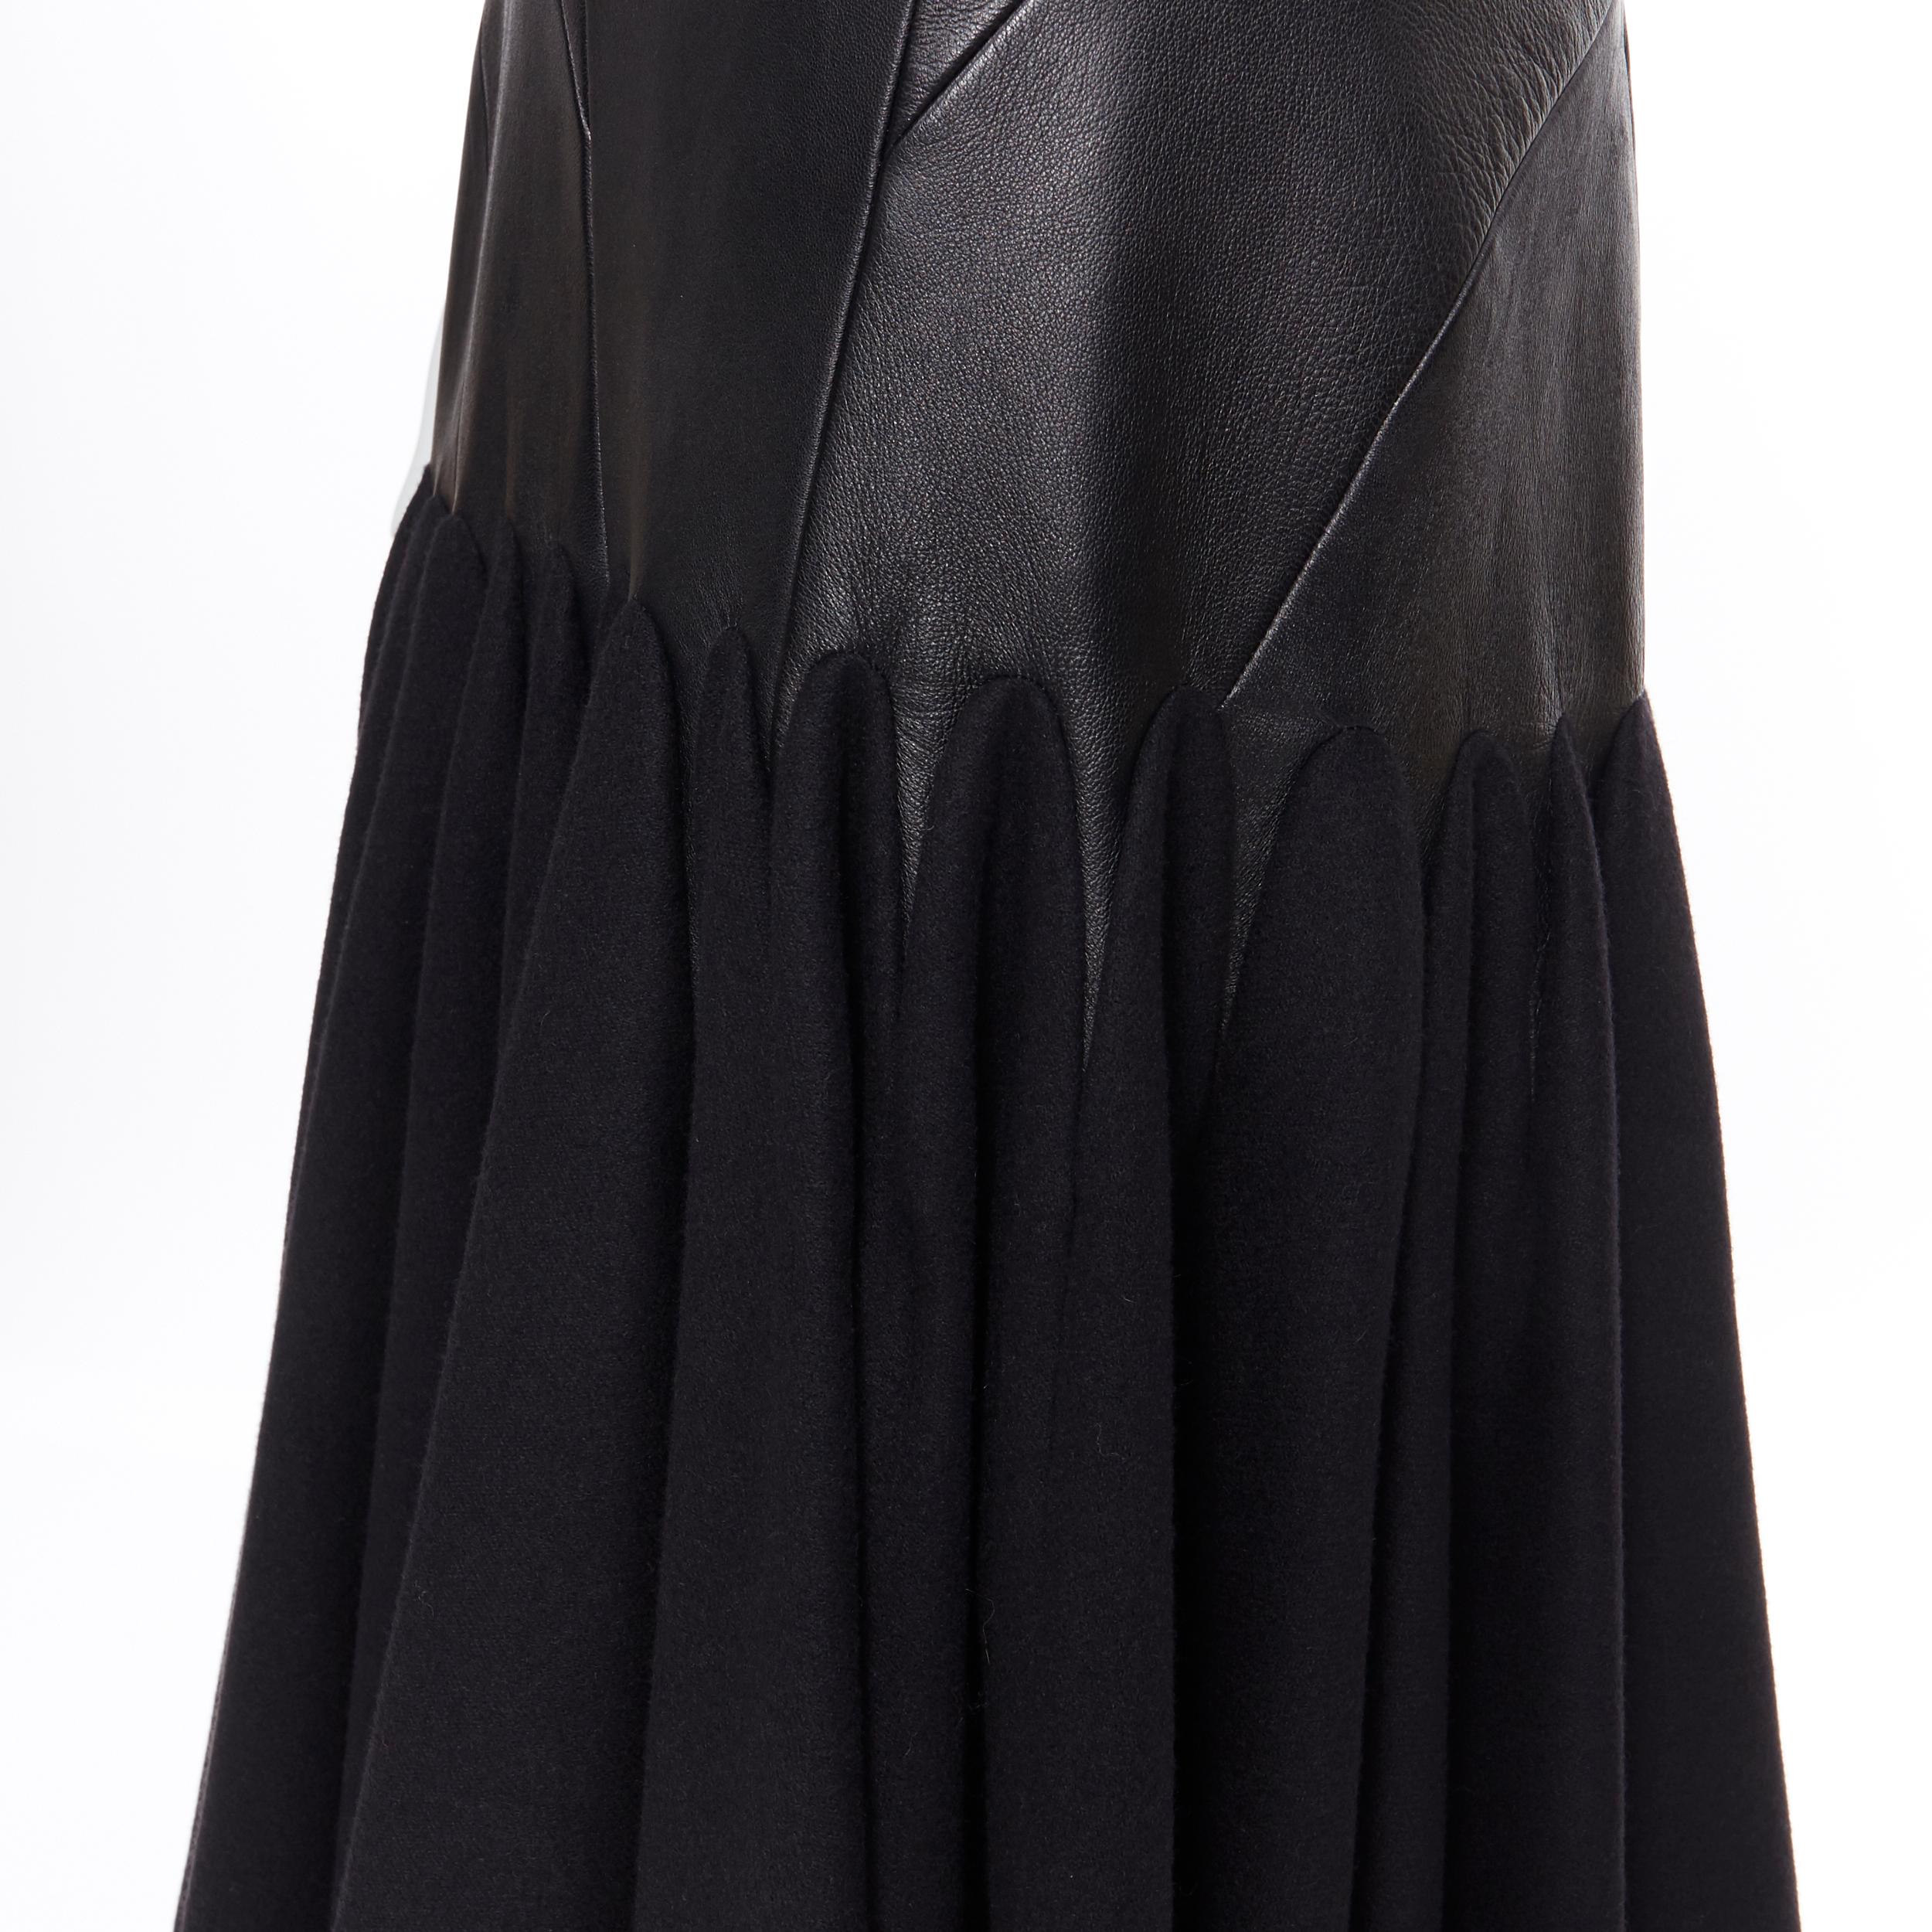 new YOHJI YAMAMOTO AW18 Runway black leather waist pleated hem skirt JP2 Reference: TGAS/A04827 
Brand: Yohji Yamamoto 
Designer: Yohji Yamamoto 
Collection: Fall Winter 2018 Runway 
Material: Wool 
Color: Black 
Pattern: Solid 
Closure: Zip